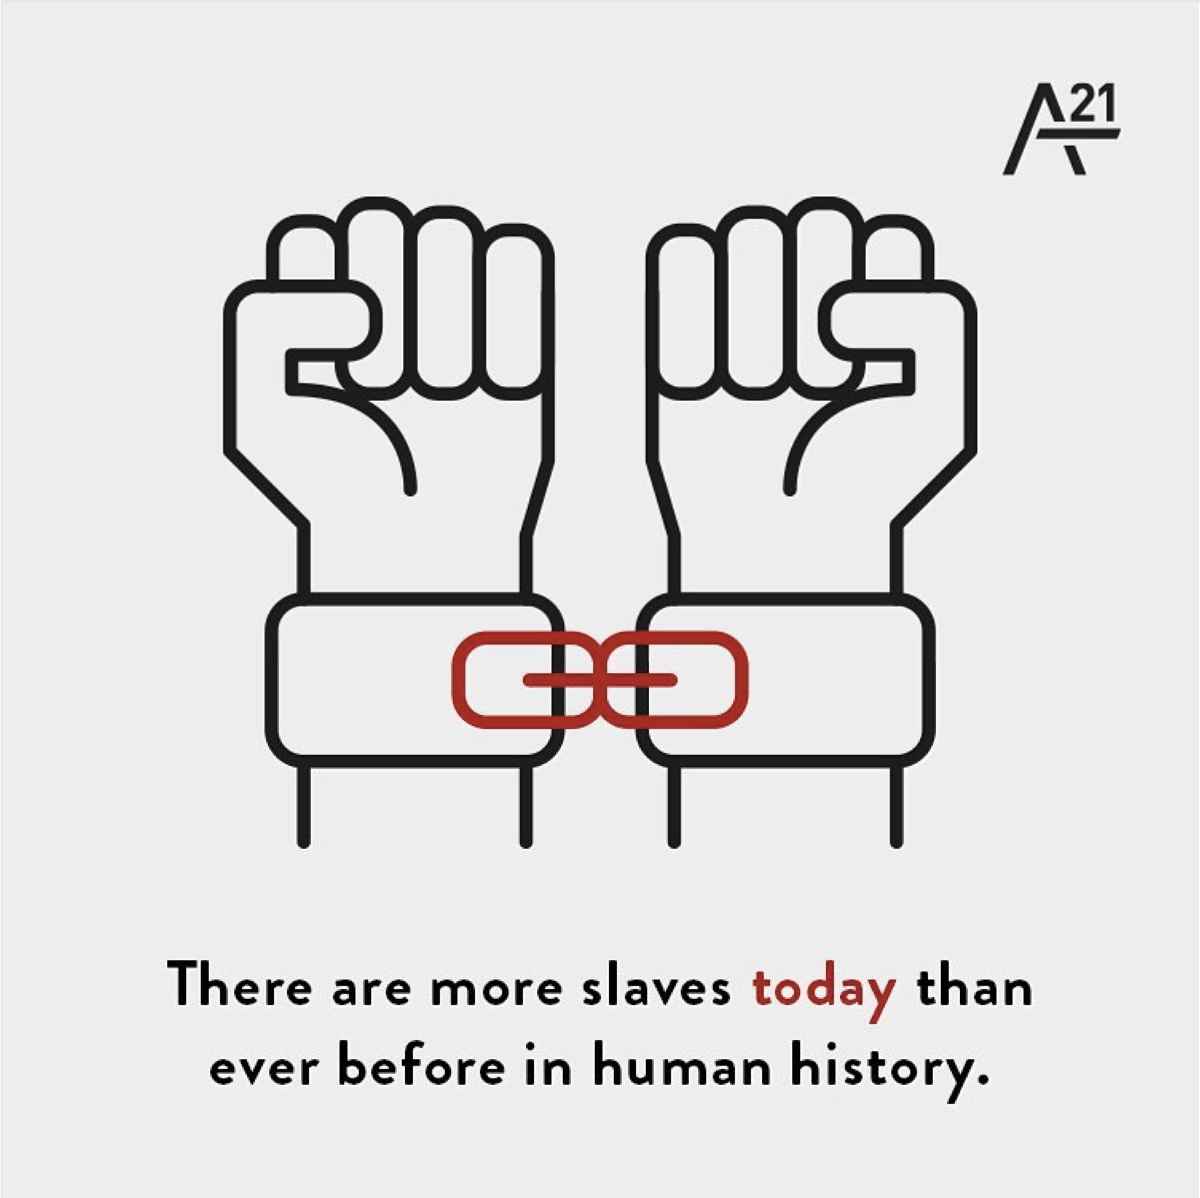 There are more slaves today than ever before in human history